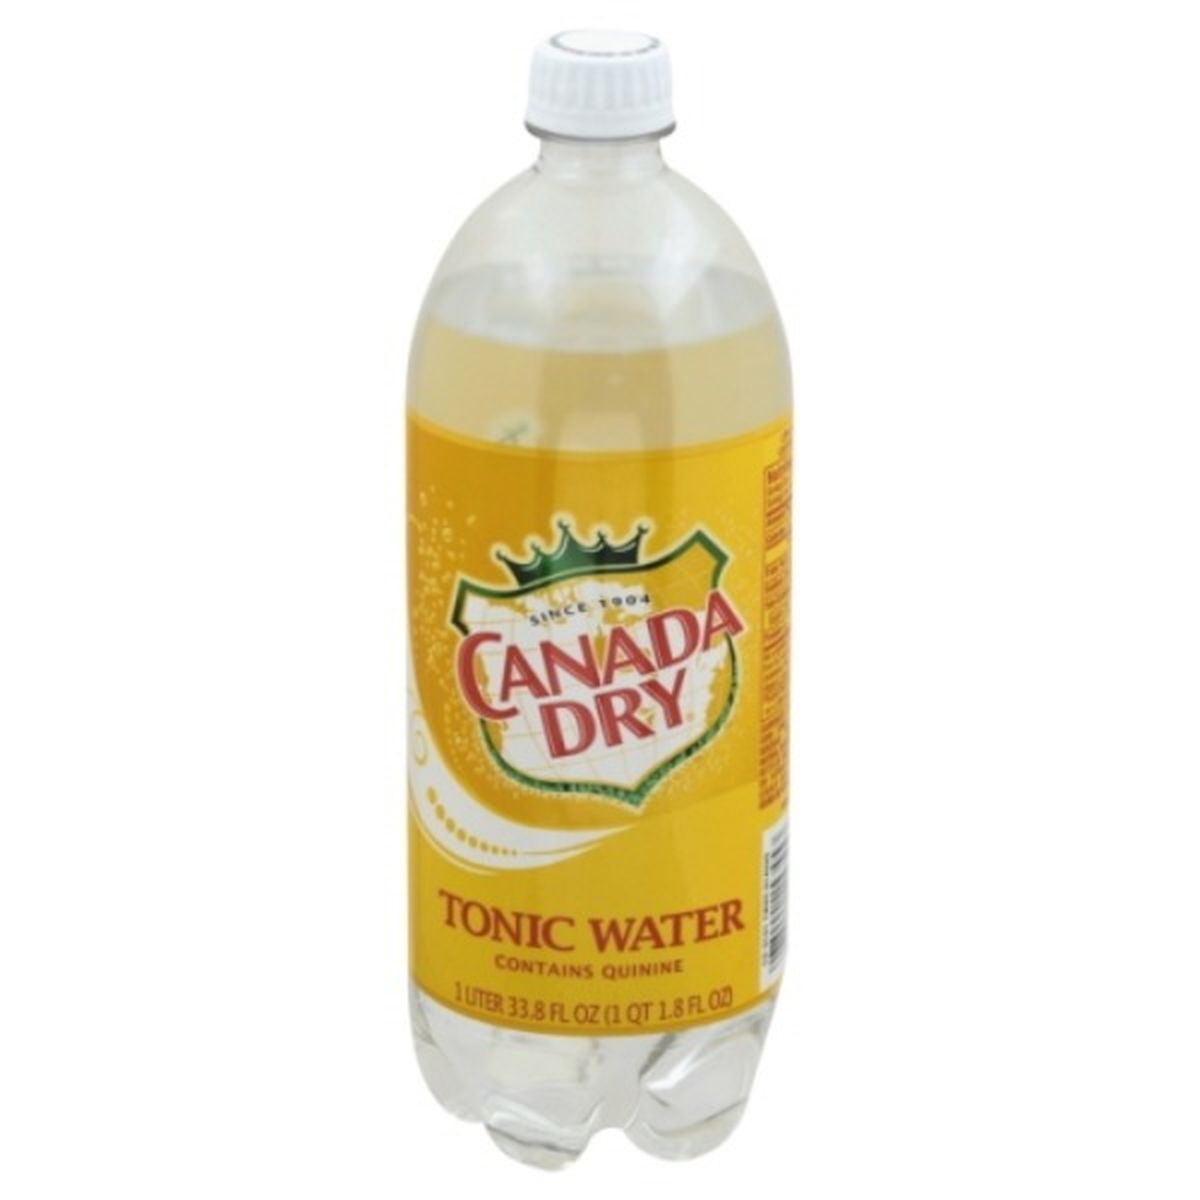 Calories in Canada Dry Tonic Water